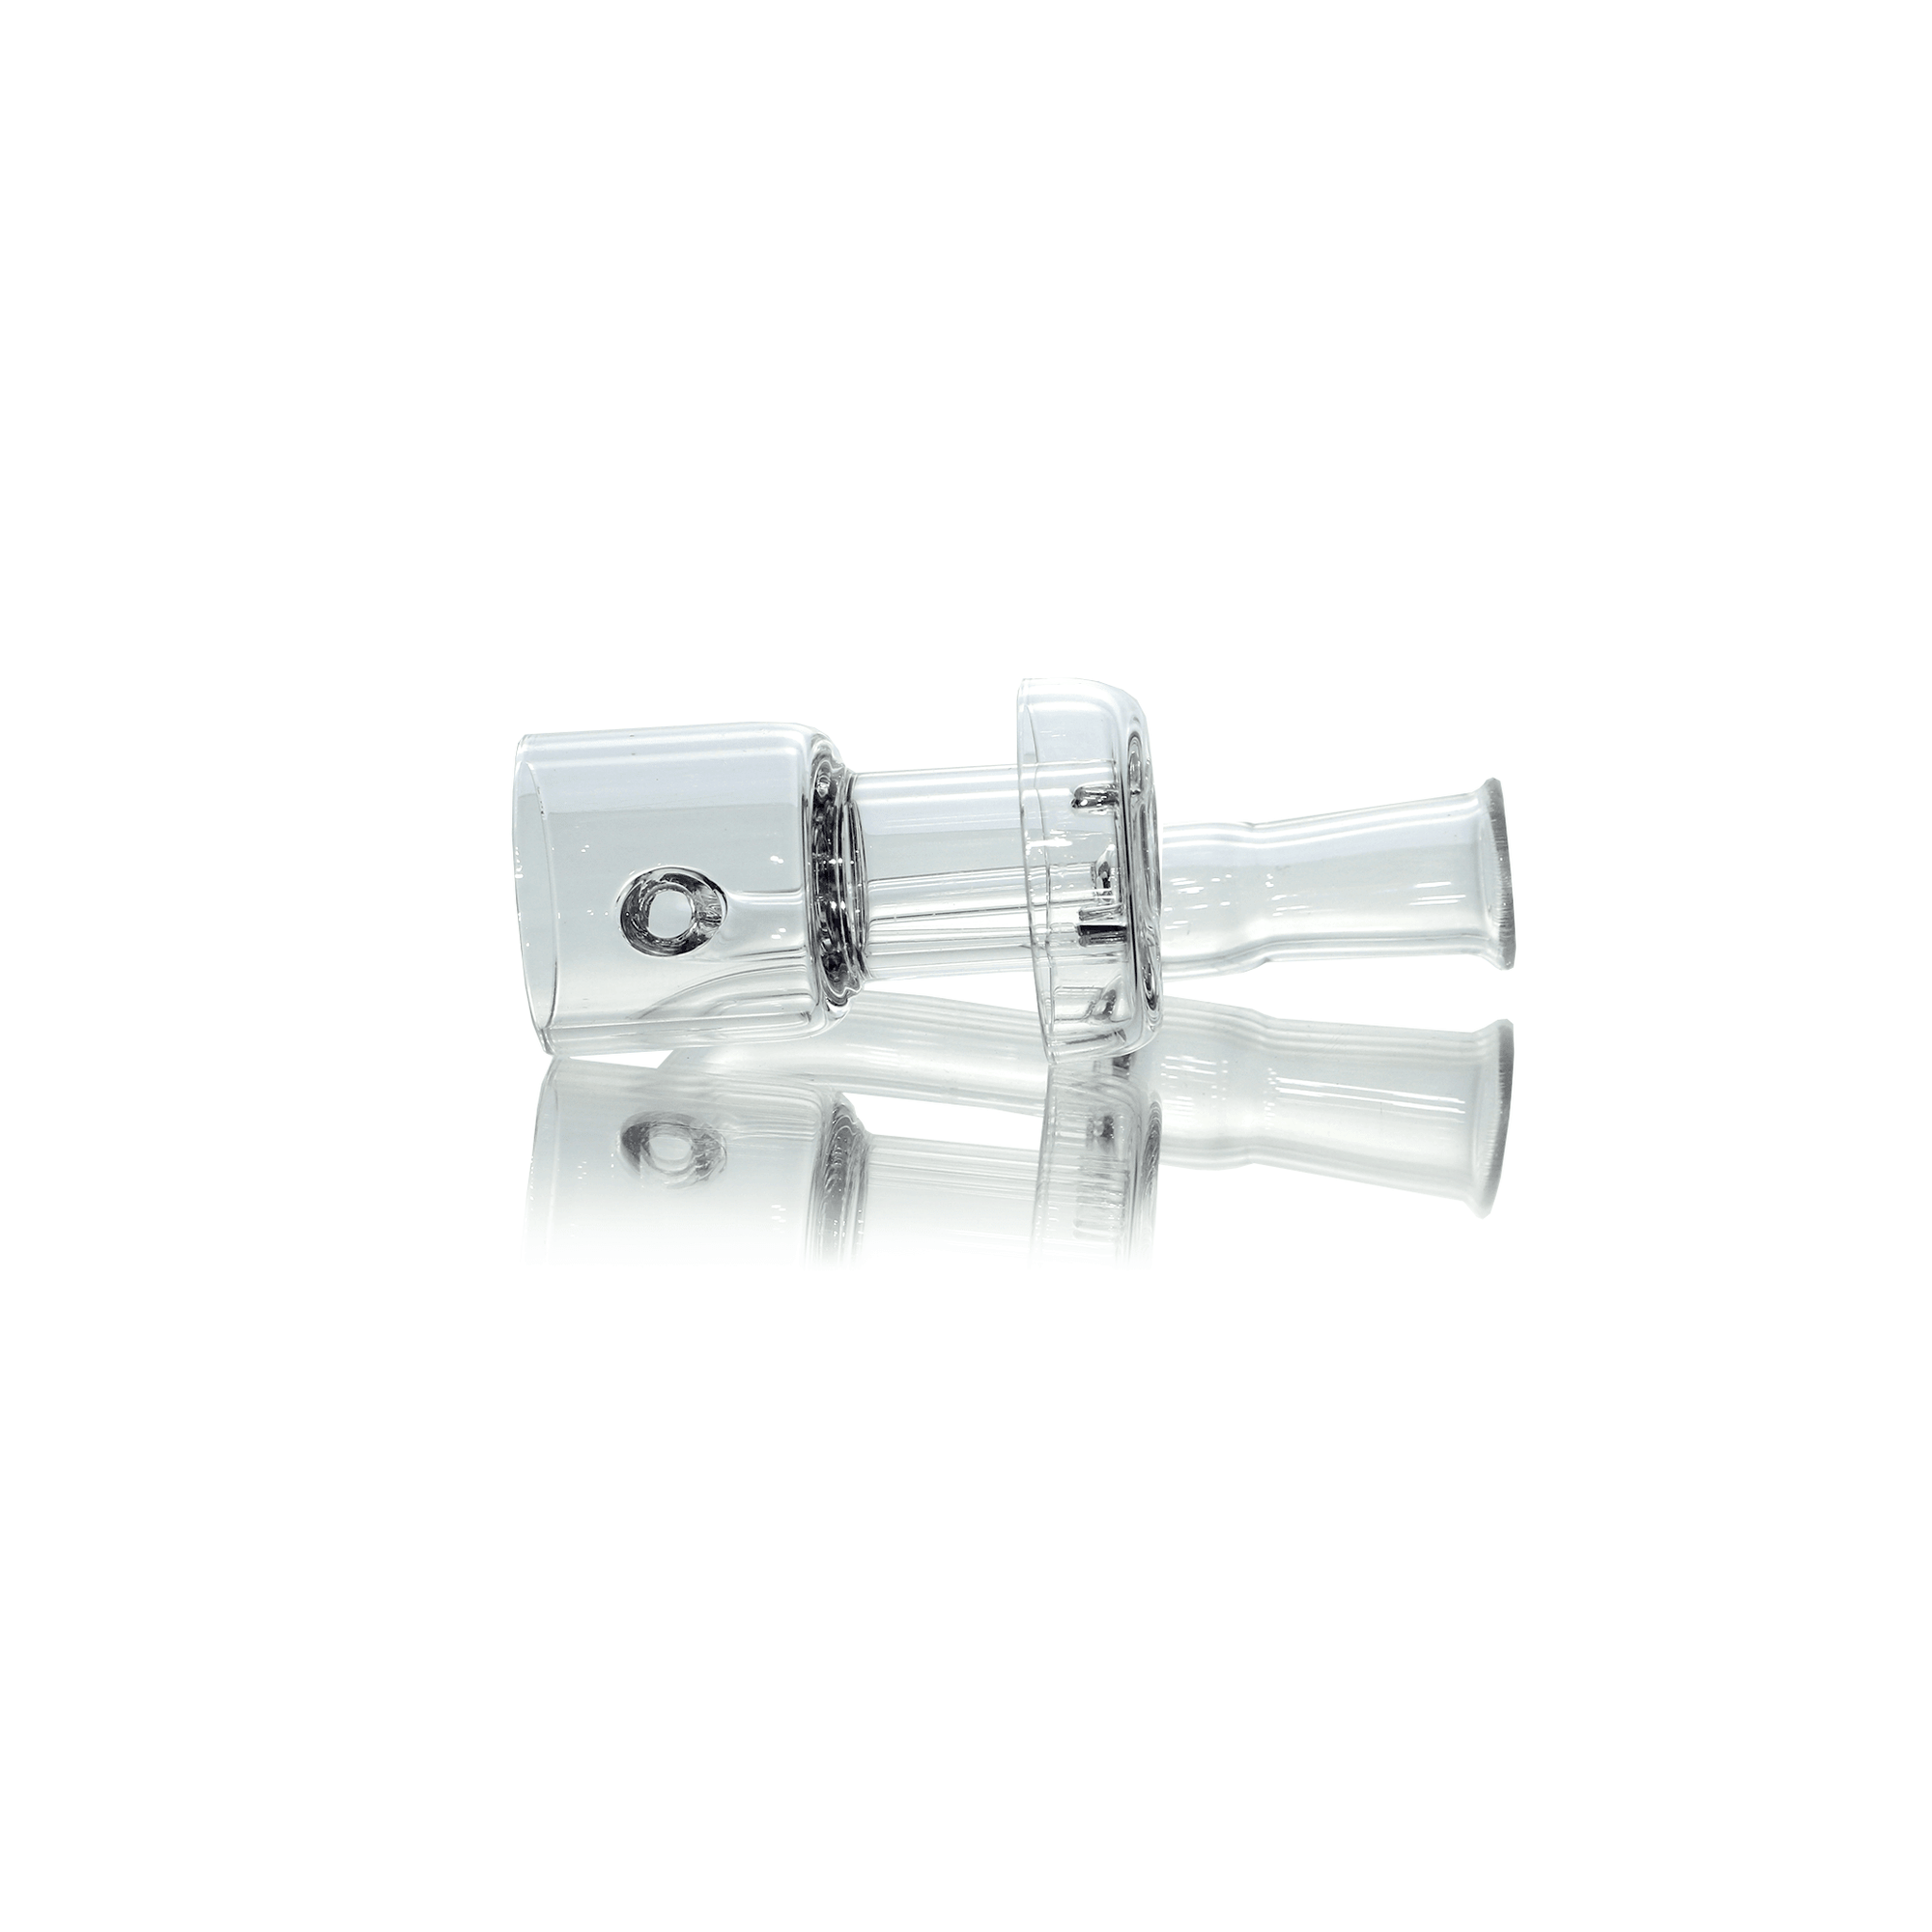 Quartz Banger Terp Slurper 10mm Female With Spinning Cap | Full Stack | the dabbing specialists